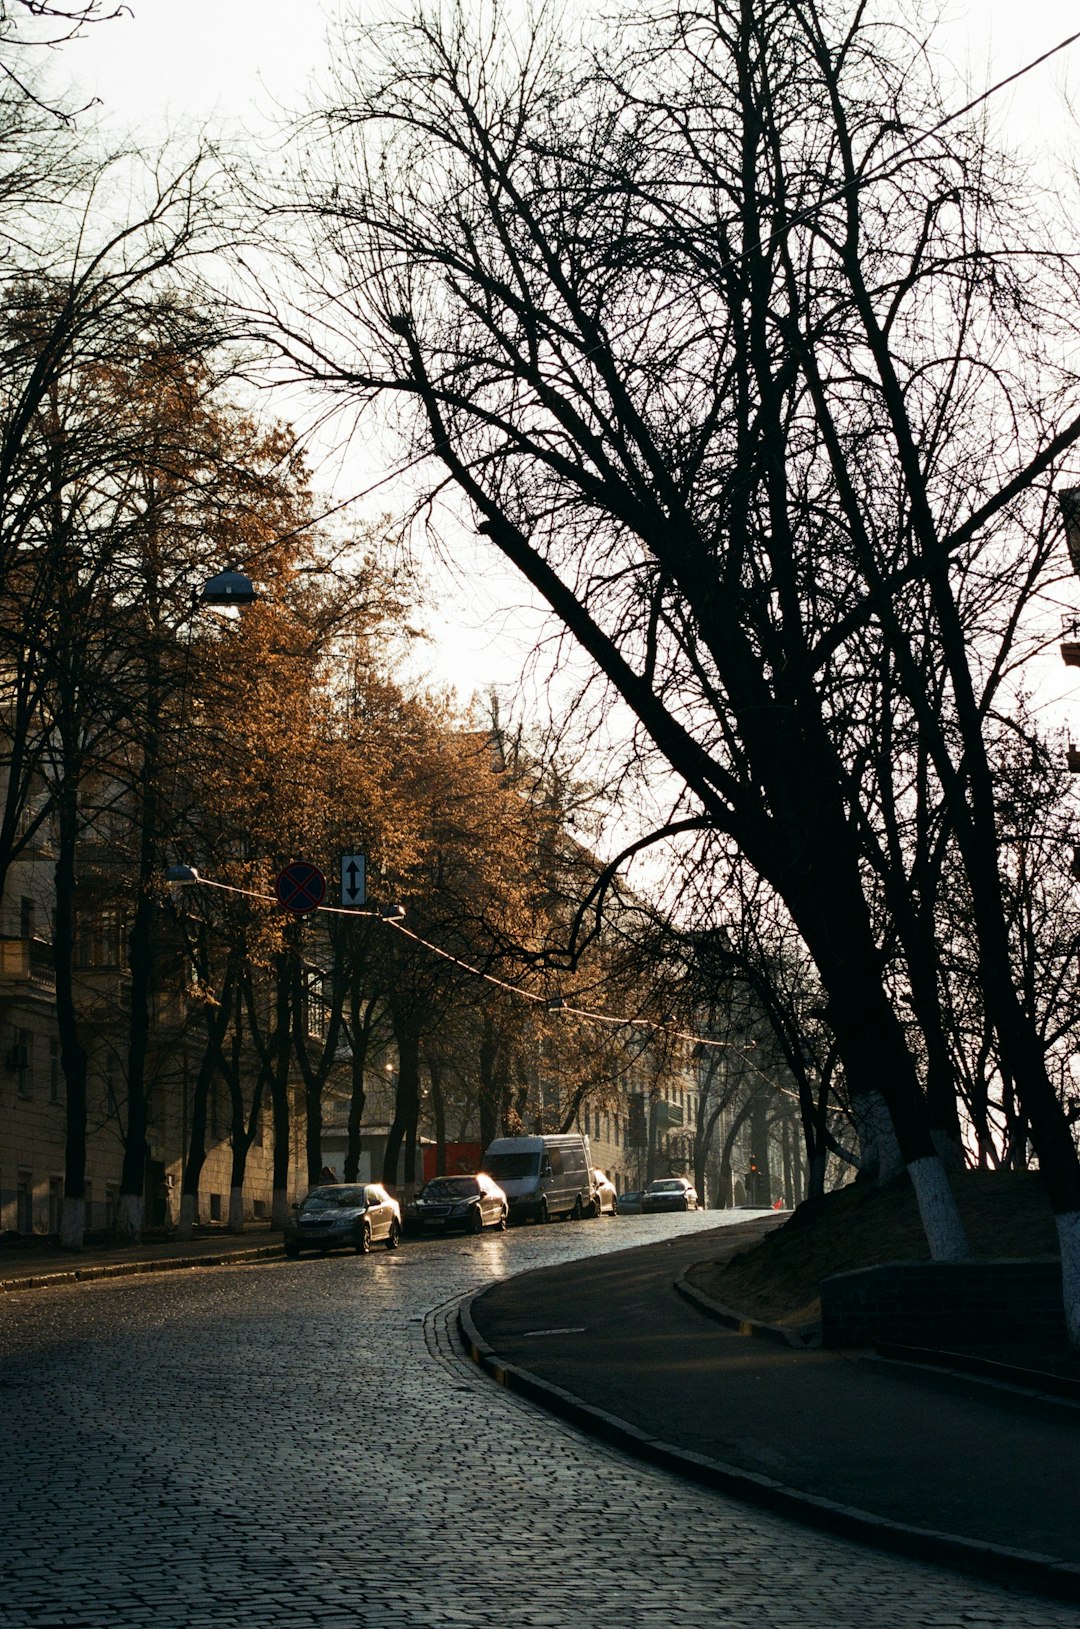 cars on road in between bare trees during daytime